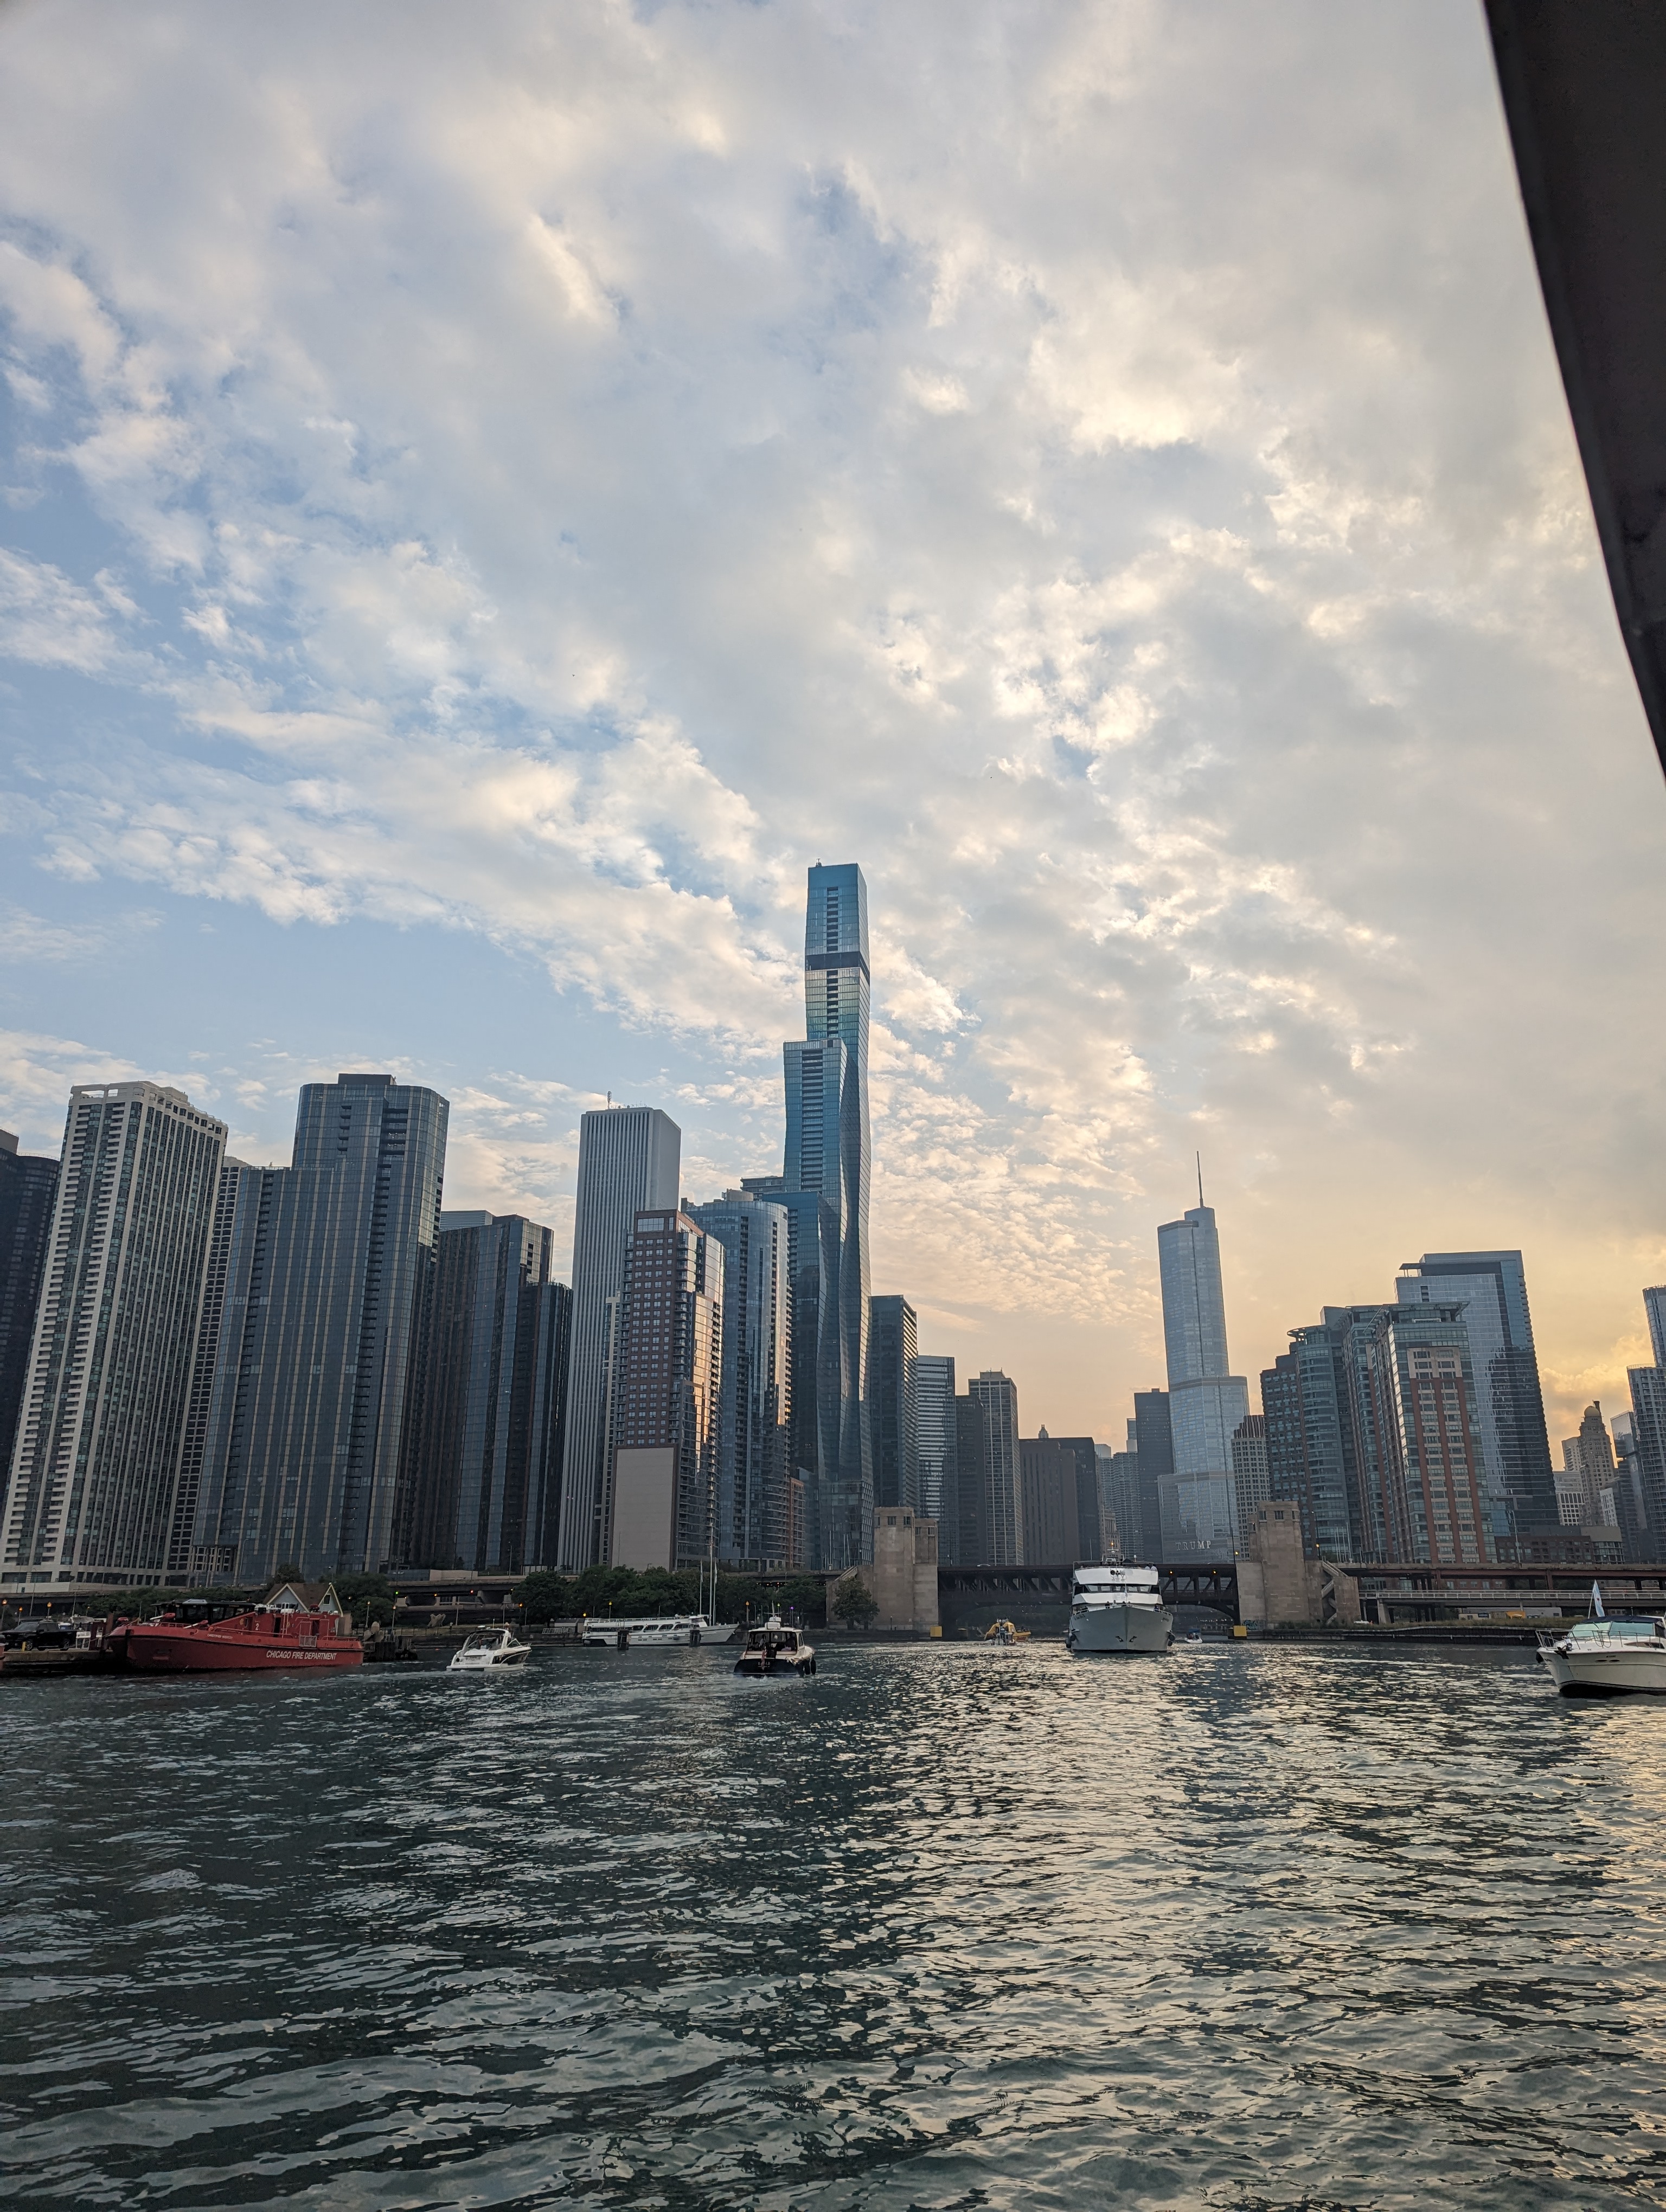 The skyline of Chicago as seen from the Chicago river basin (area just before the locks connecting it to lake Michigan). In the center of the shot is the St. Regis (tallest building in the world with the lead architect being a woman) and off to the right is trump tower.